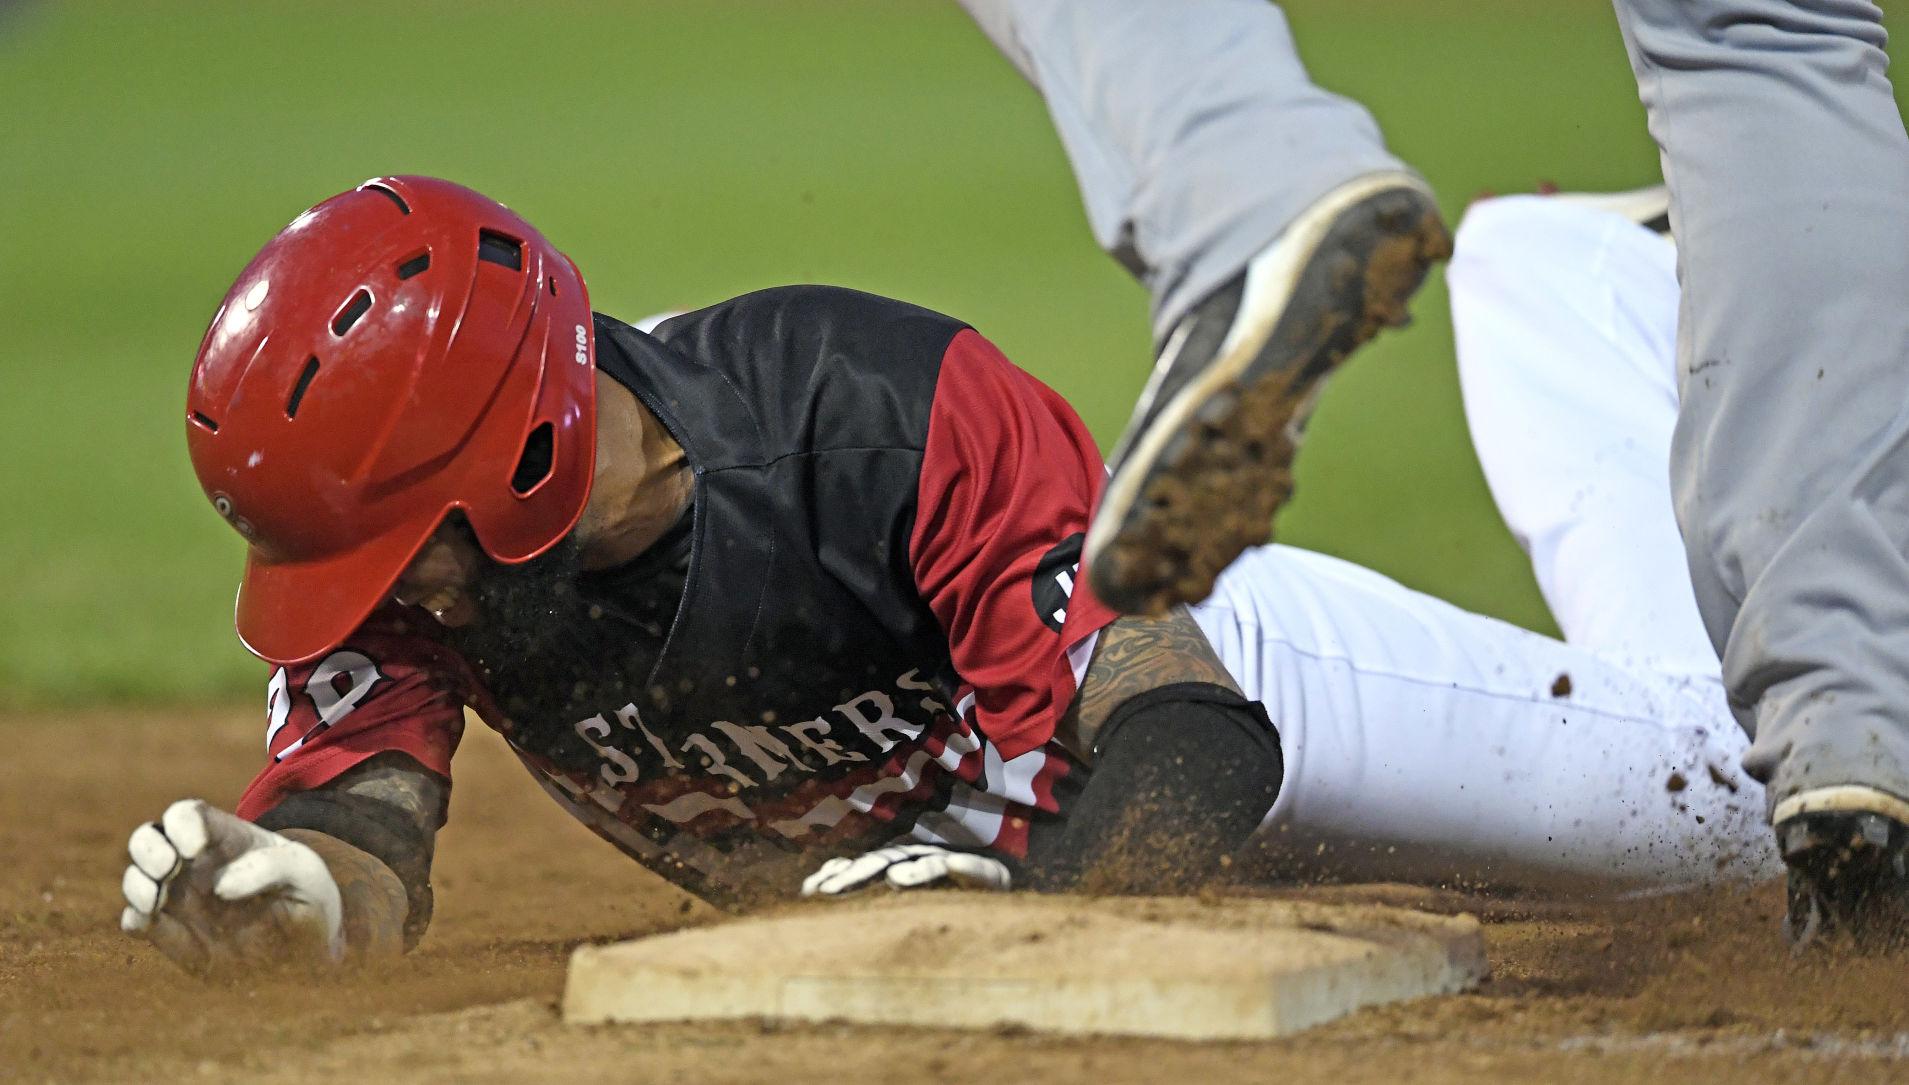 Barnstormers suffer shutout loss to Somerset in series finale | Lancaster Barnstormers